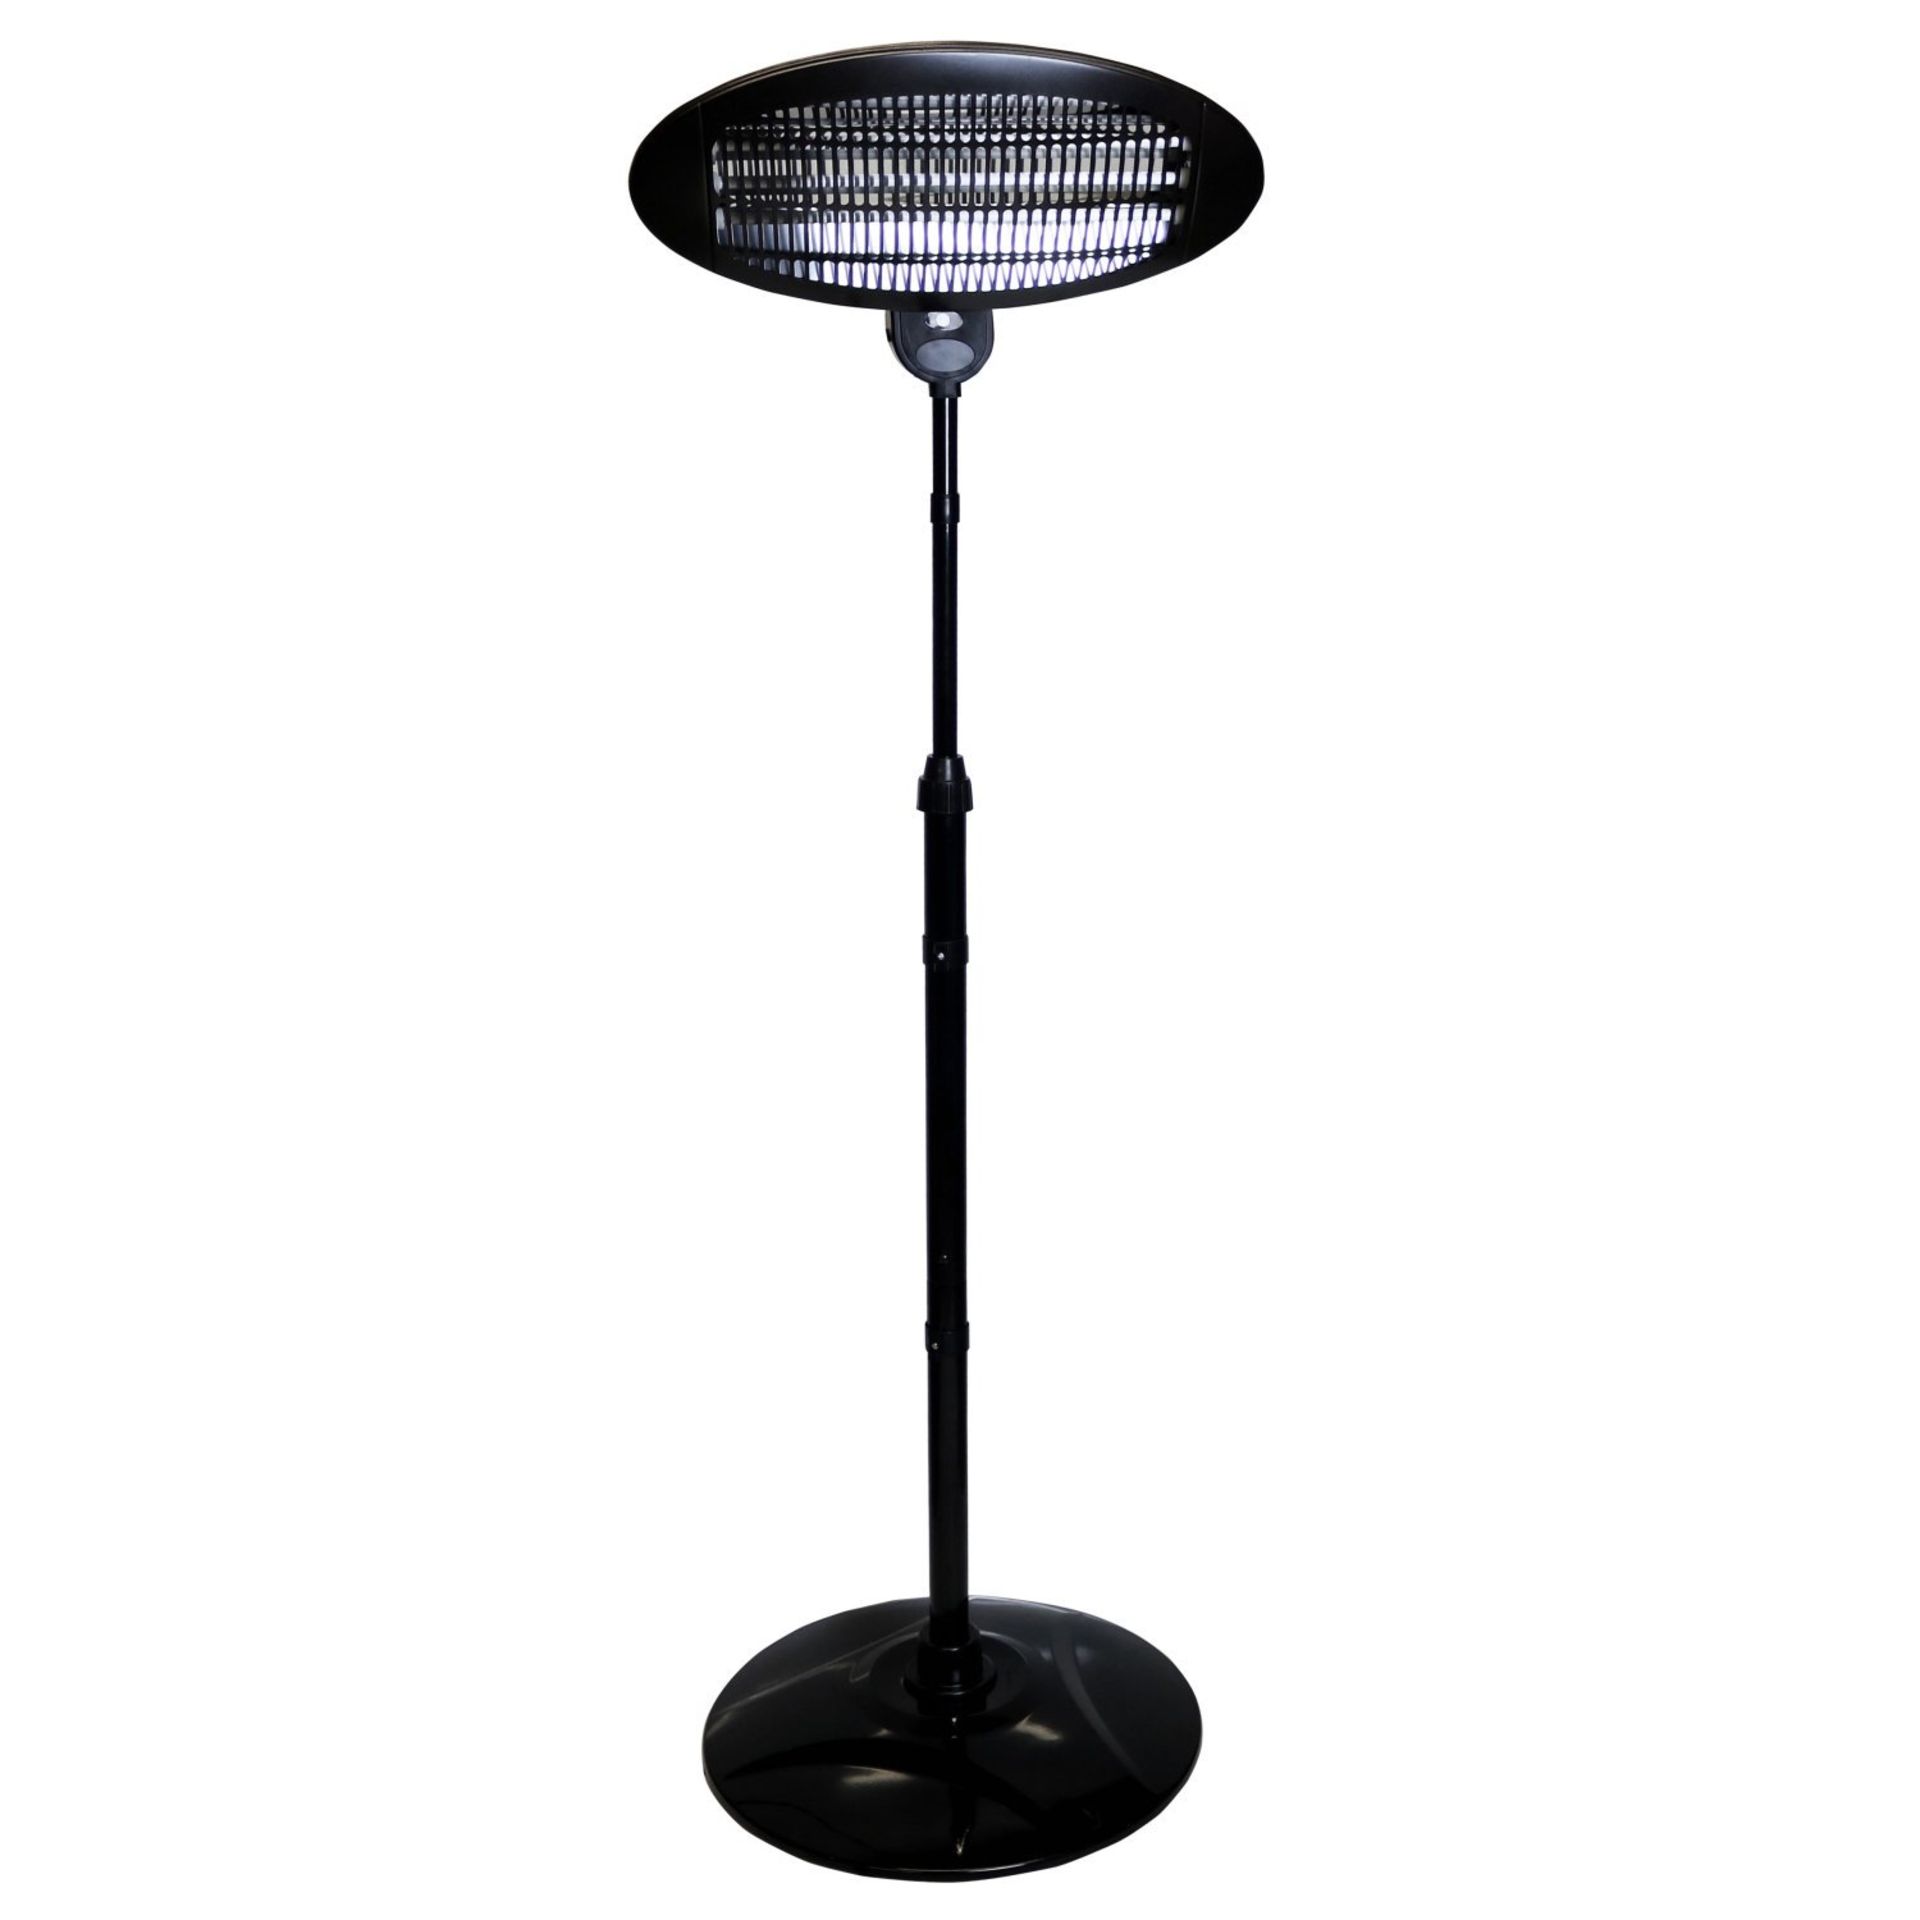 (KK28) 2KW Free Standing Outdoor Electric Garden Patio Heater Our heater combines a r... - Image 2 of 2